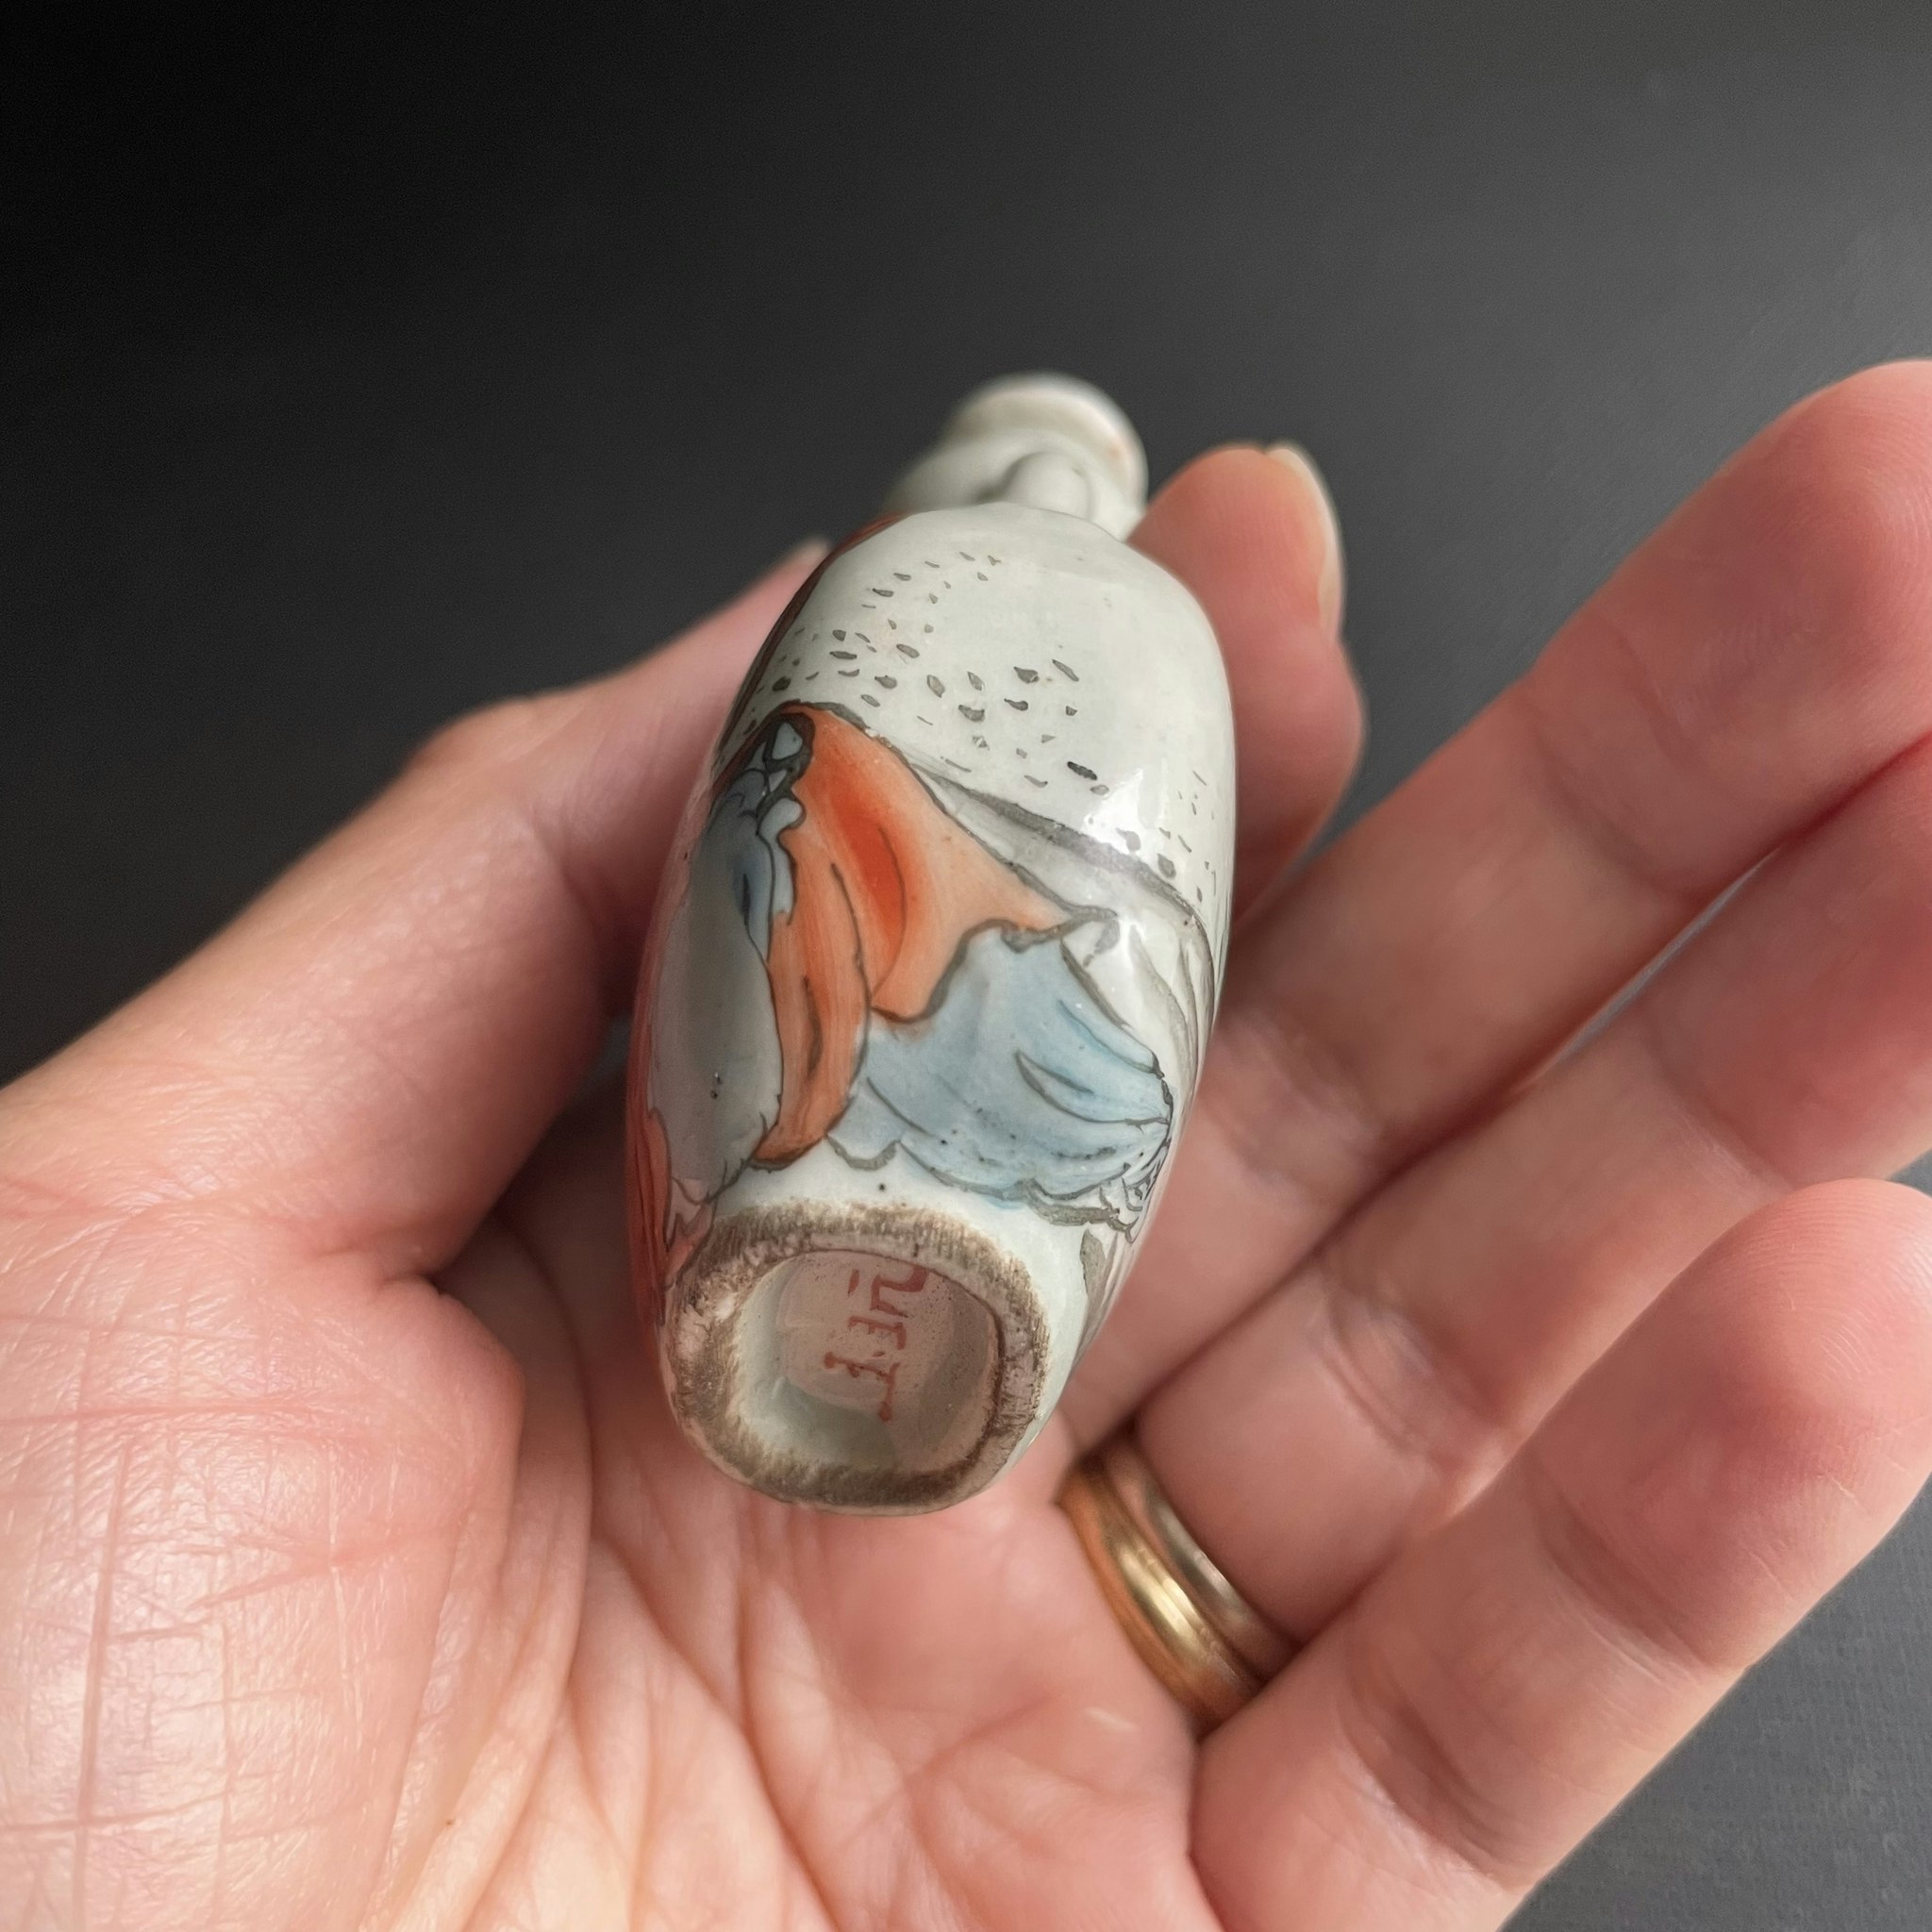 Antique Chinese porcelain snuffbottle Late Qing / Republic #1170